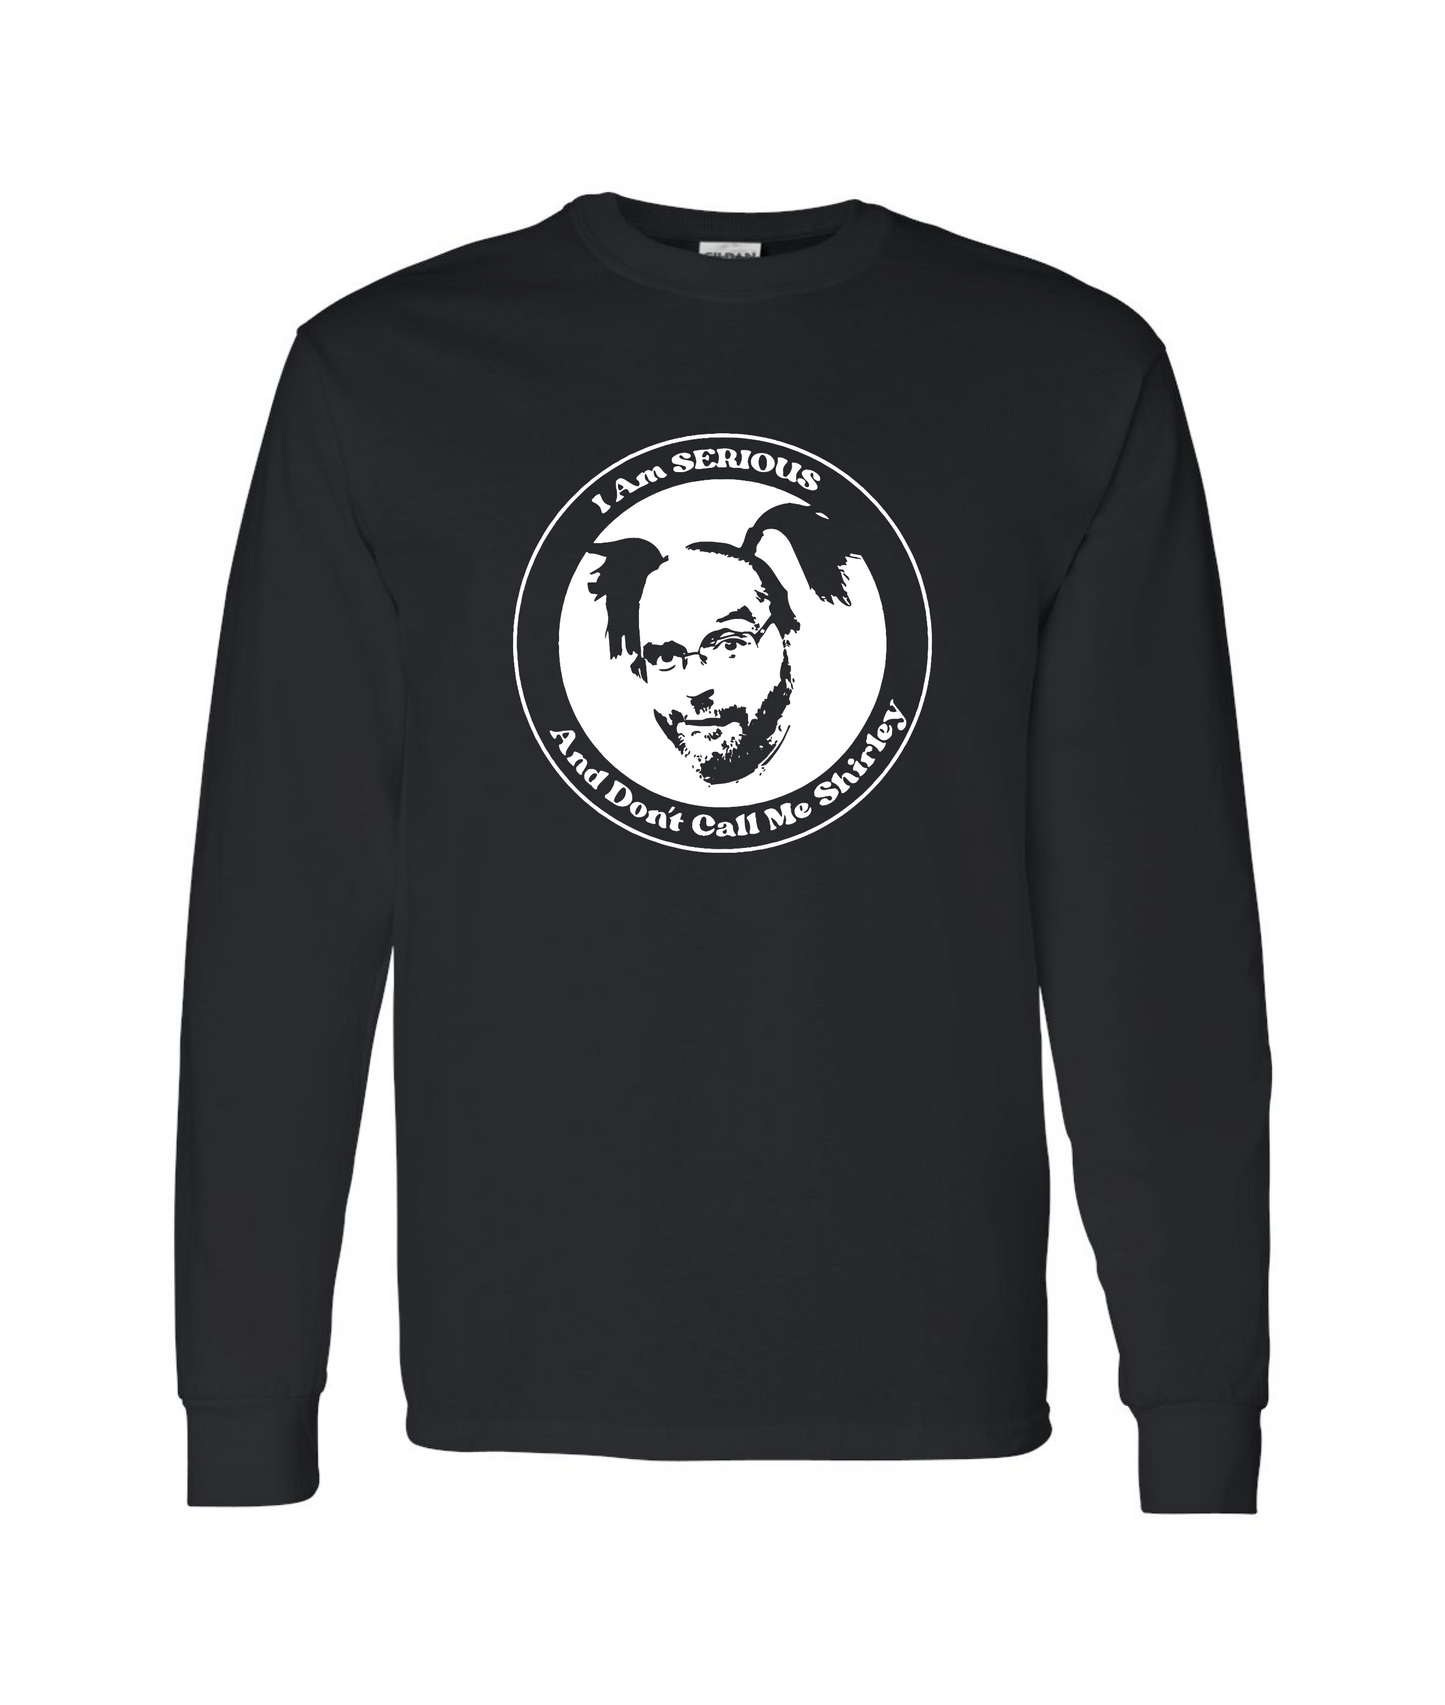 Serious Shirley - Don't Call Me Shirley - Black Long Sleeve T